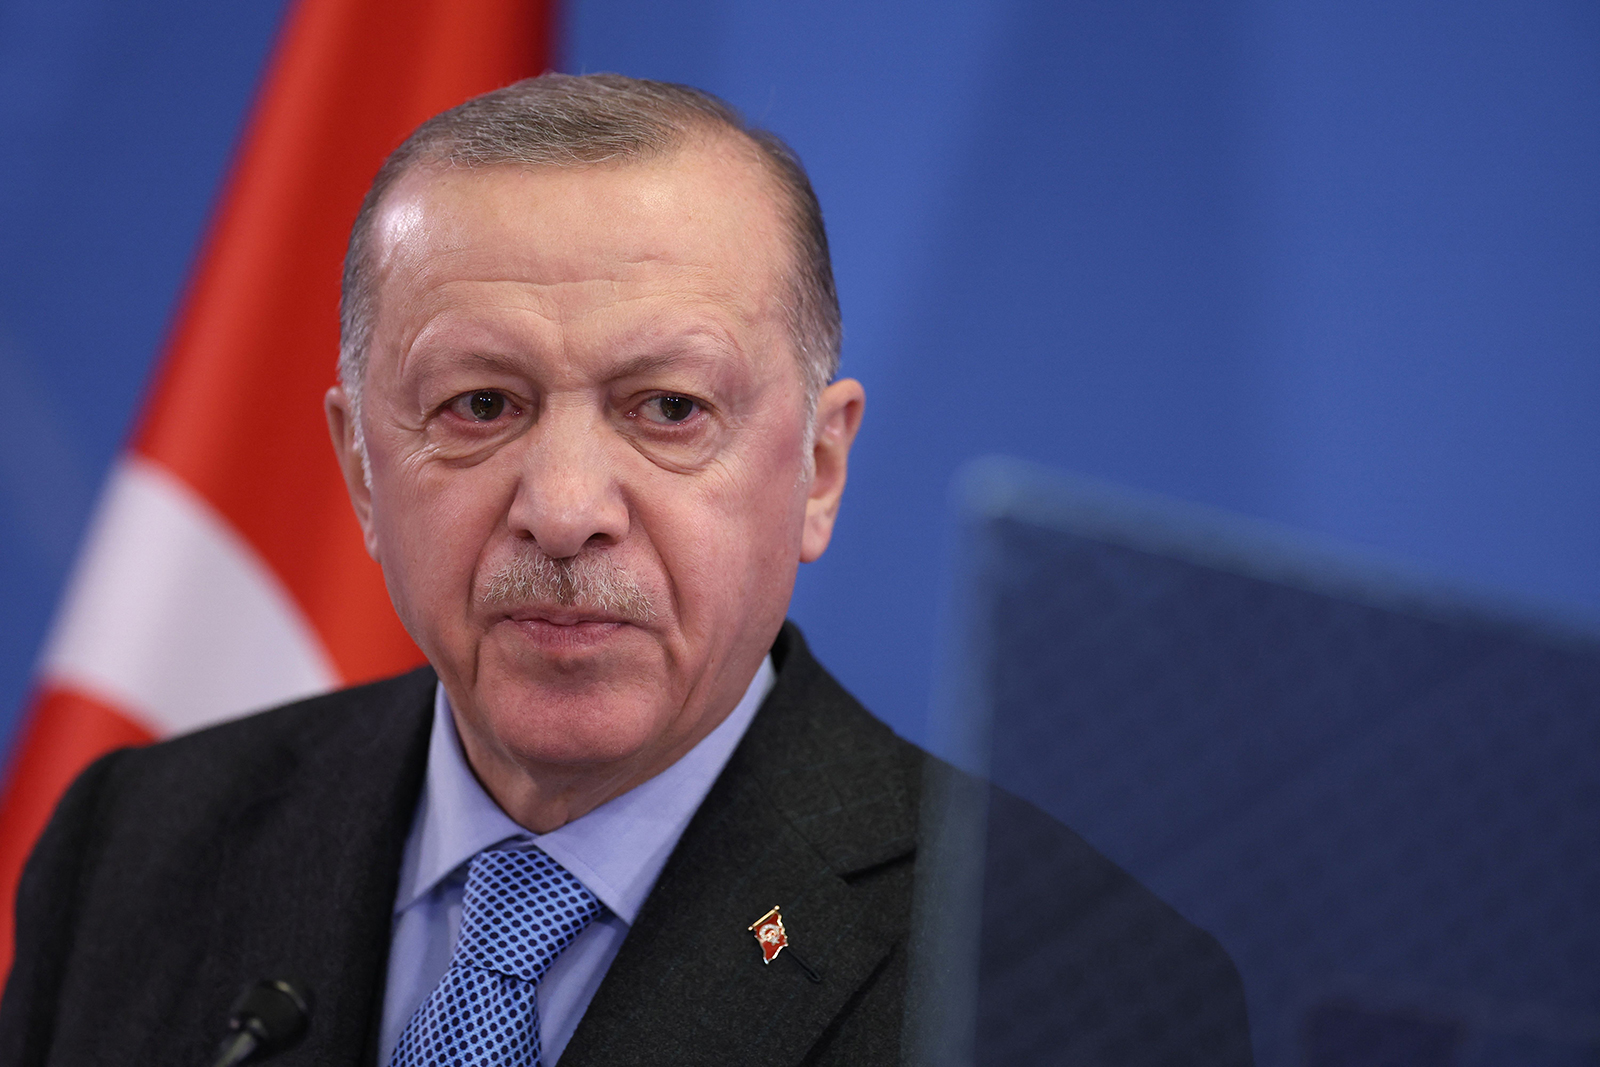 Turkey's President Recep Tayyip Erdogan addresses media representatives during a press conference at a European Union summit at EU Headquarters in Brussels on March 24.